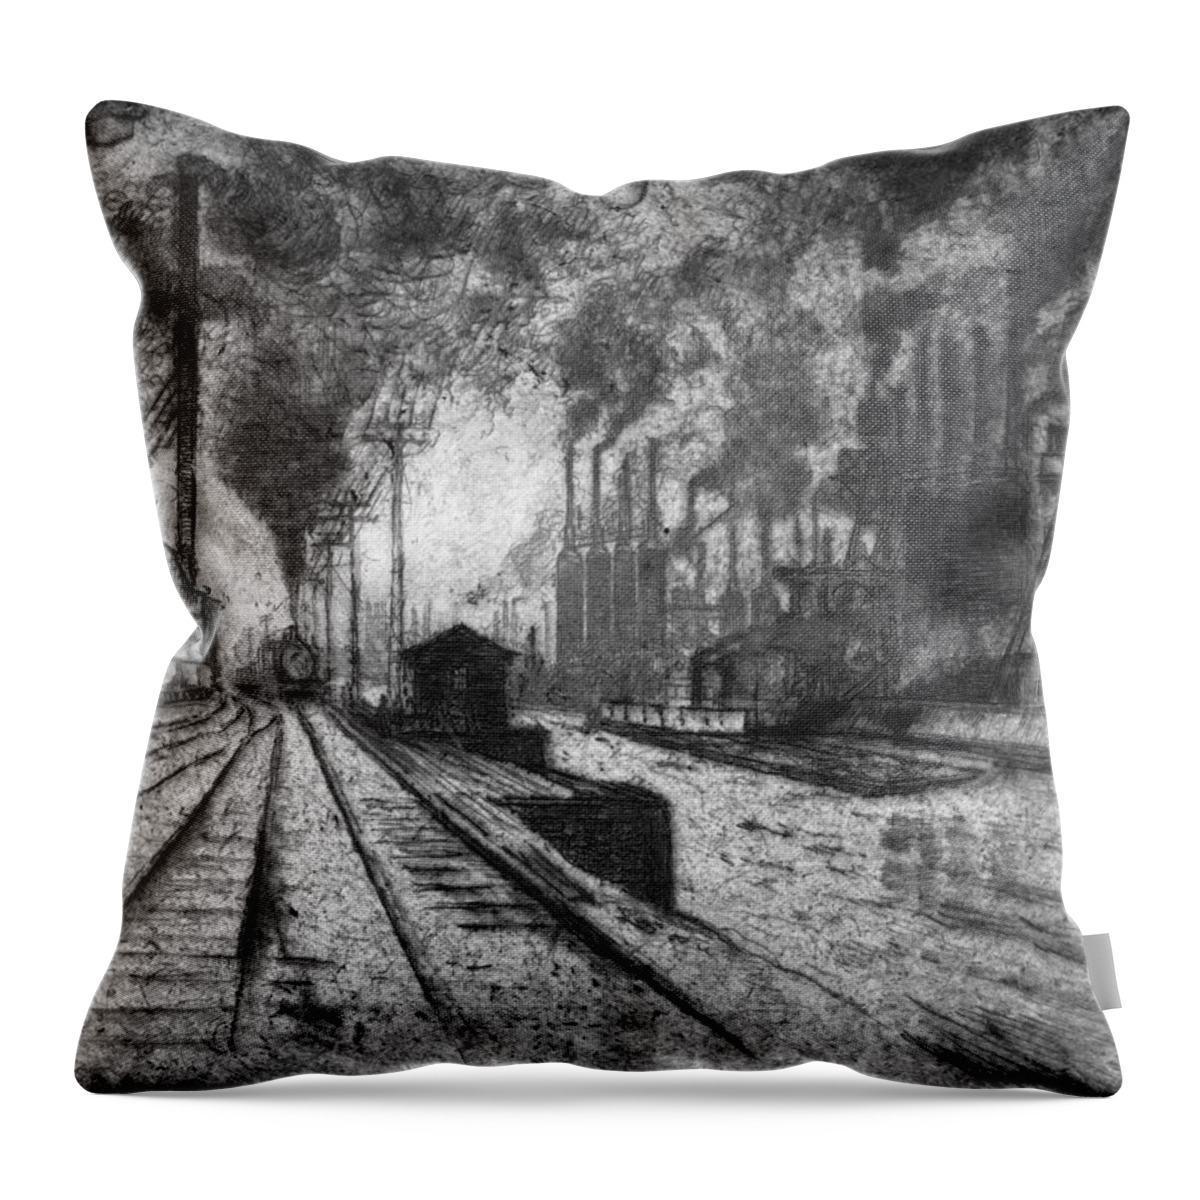 1909 Throw Pillow featuring the painting Pennell Homestead, 1909 by Granger